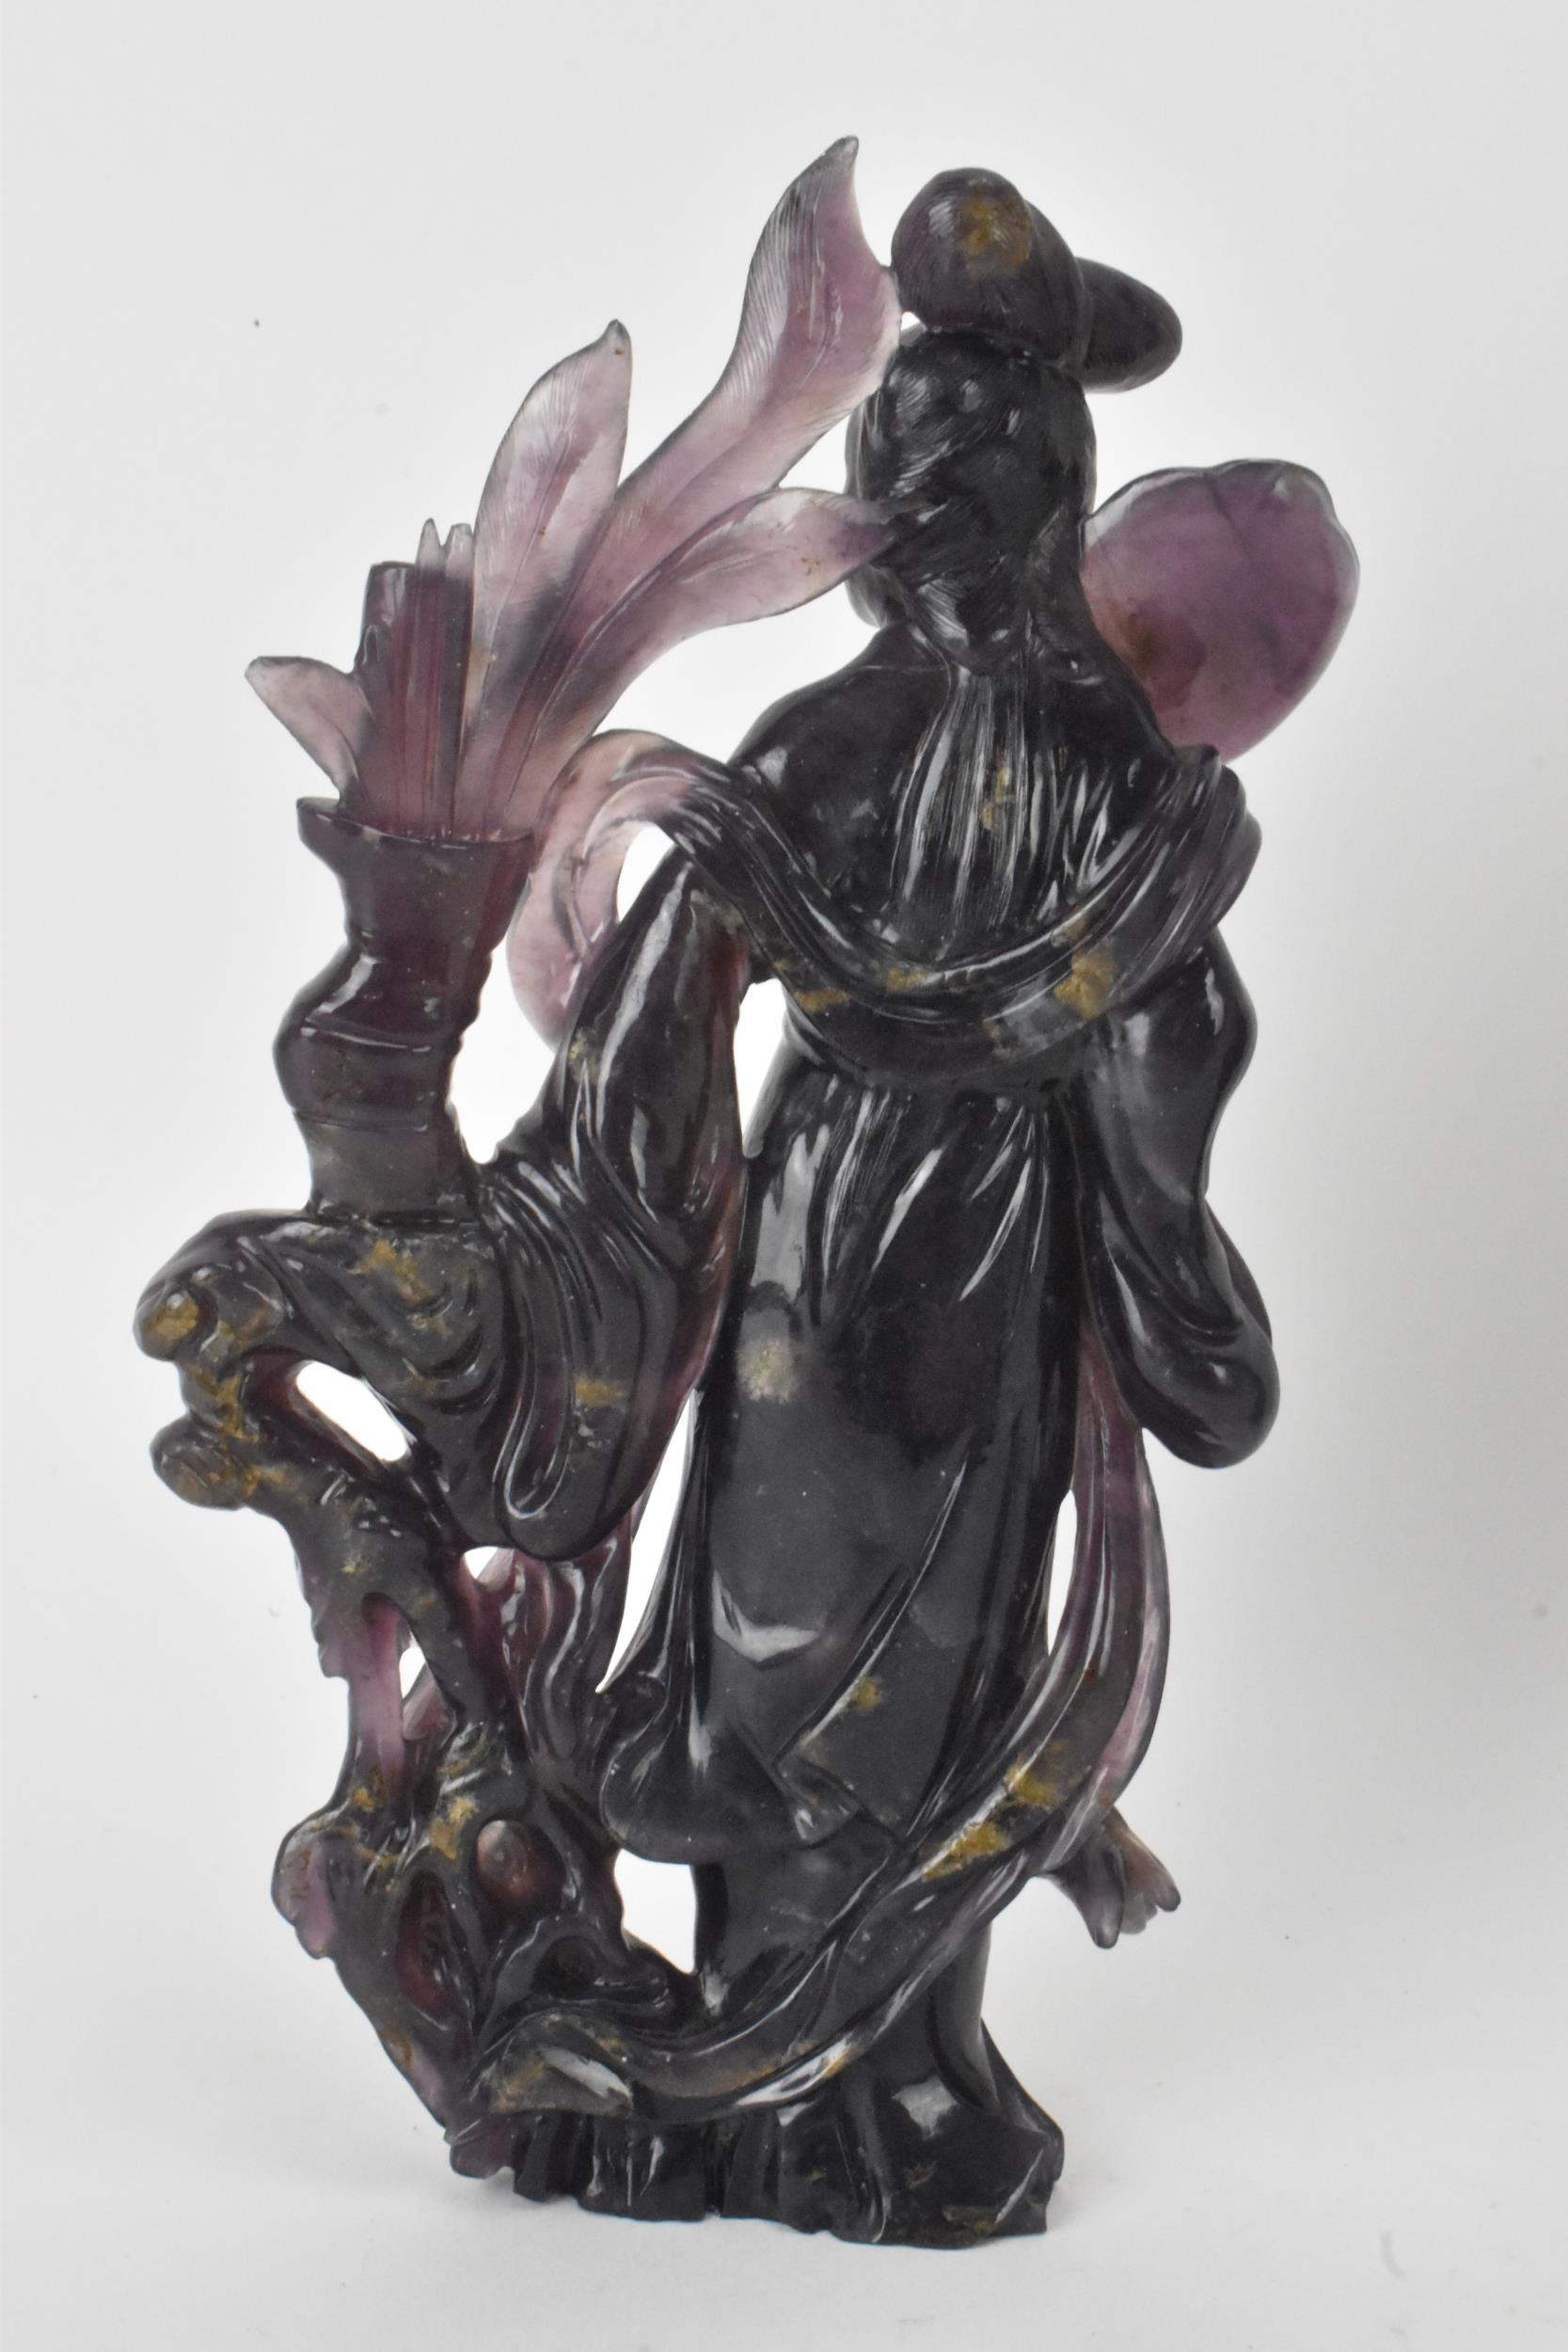 Two Chinese 20th century jadeite carved figures, the green example modeled holding a fan and flowers - Image 3 of 7